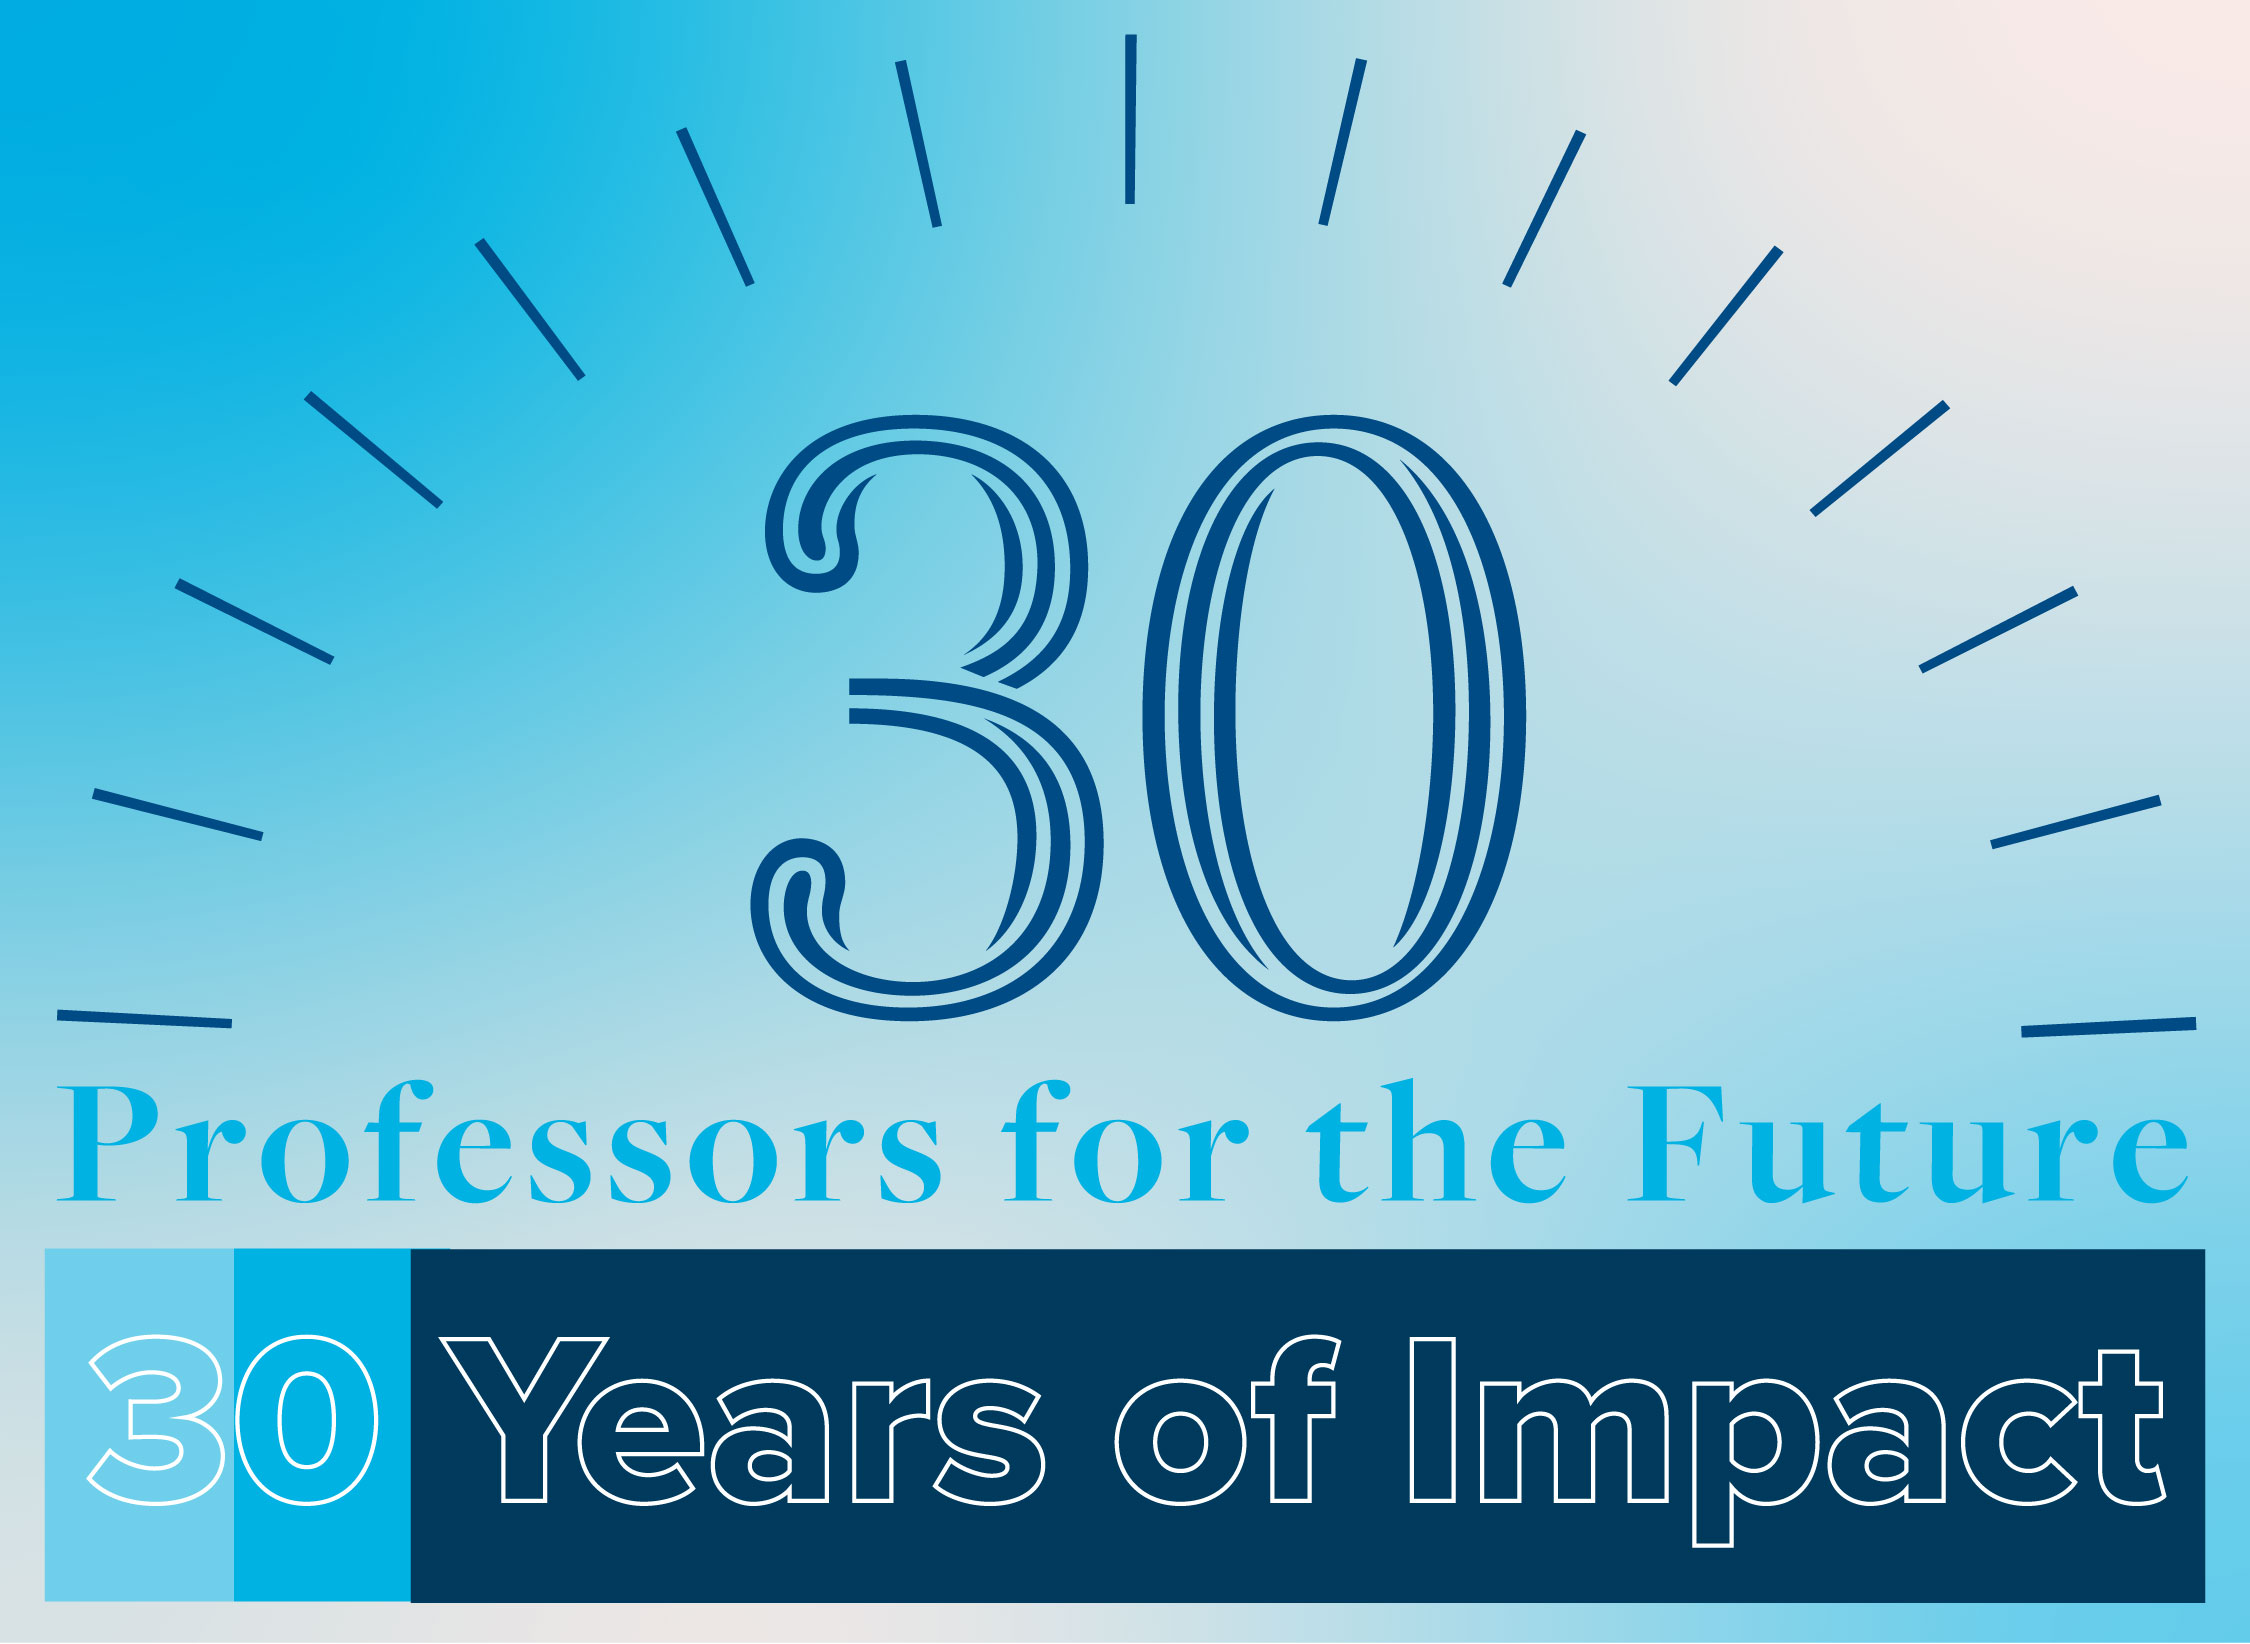 30 with graphic sun rays, blue in color. Professors for the Future. 30 Years of Impact